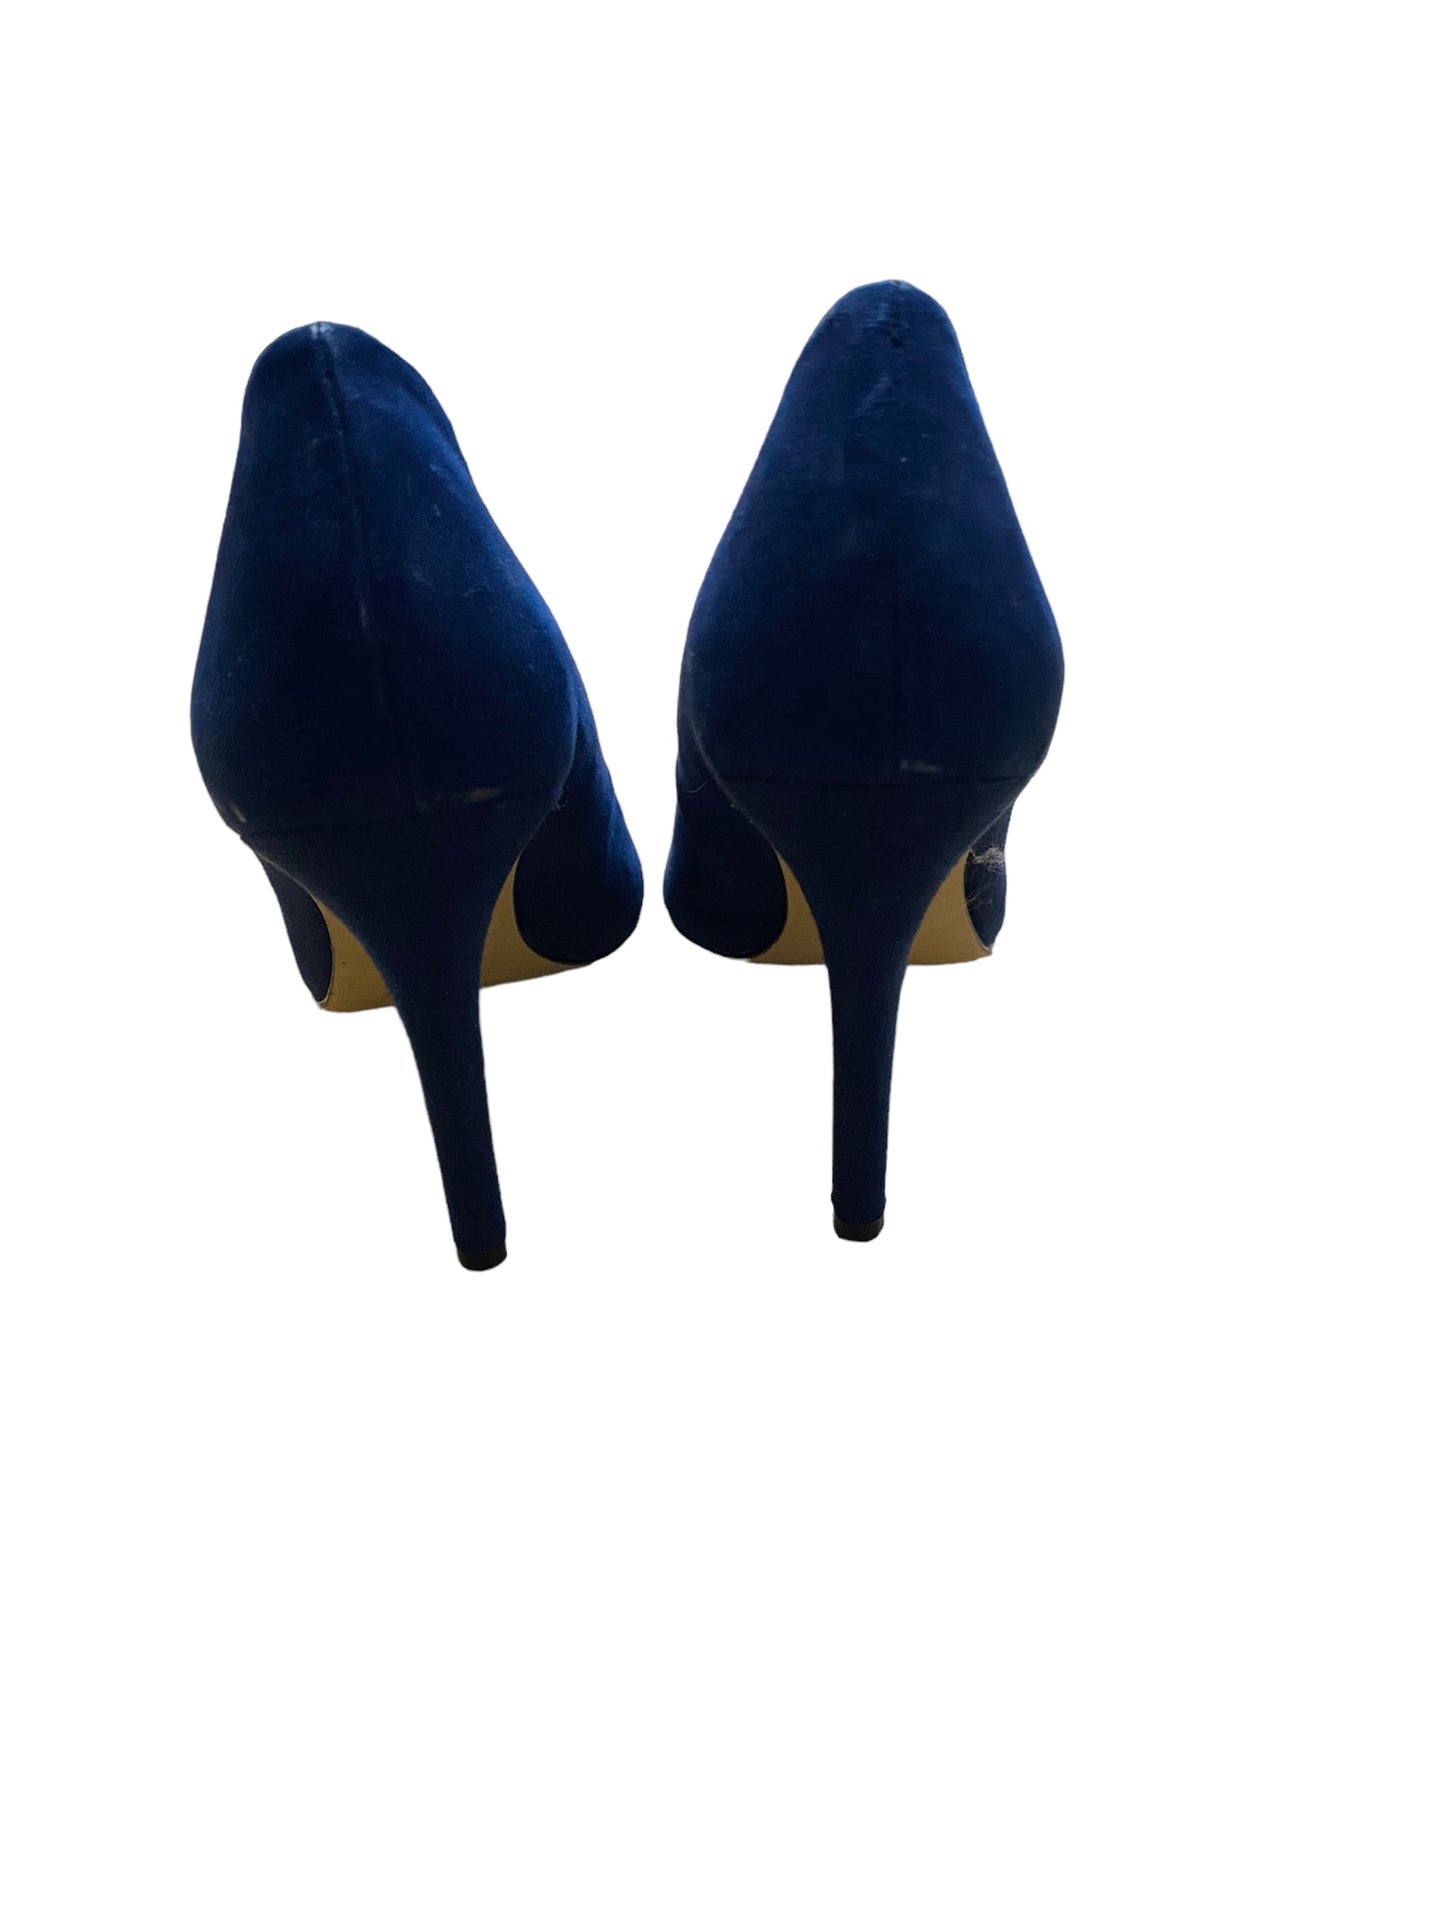 Shoes Heels Stiletto By Saks Fifth Avenue  Size: 6